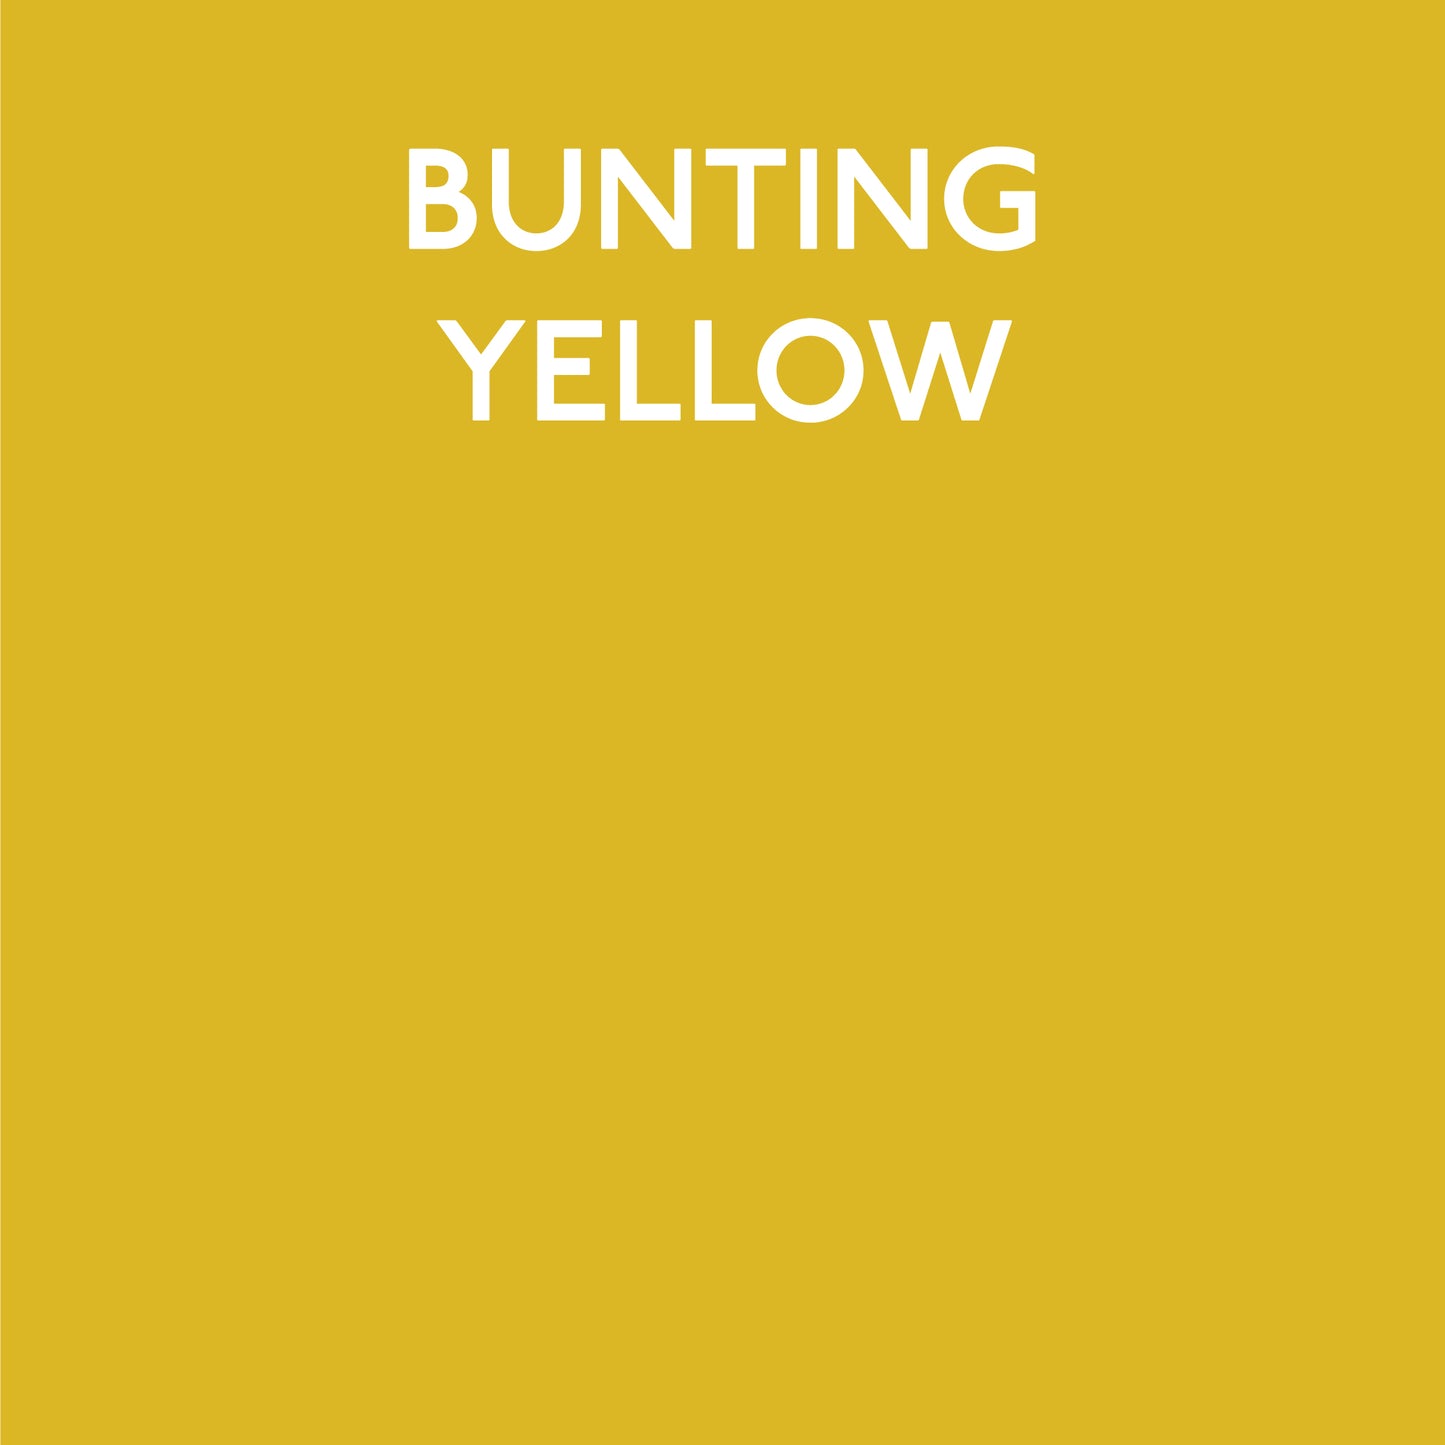 Bunting Yellow Swatch